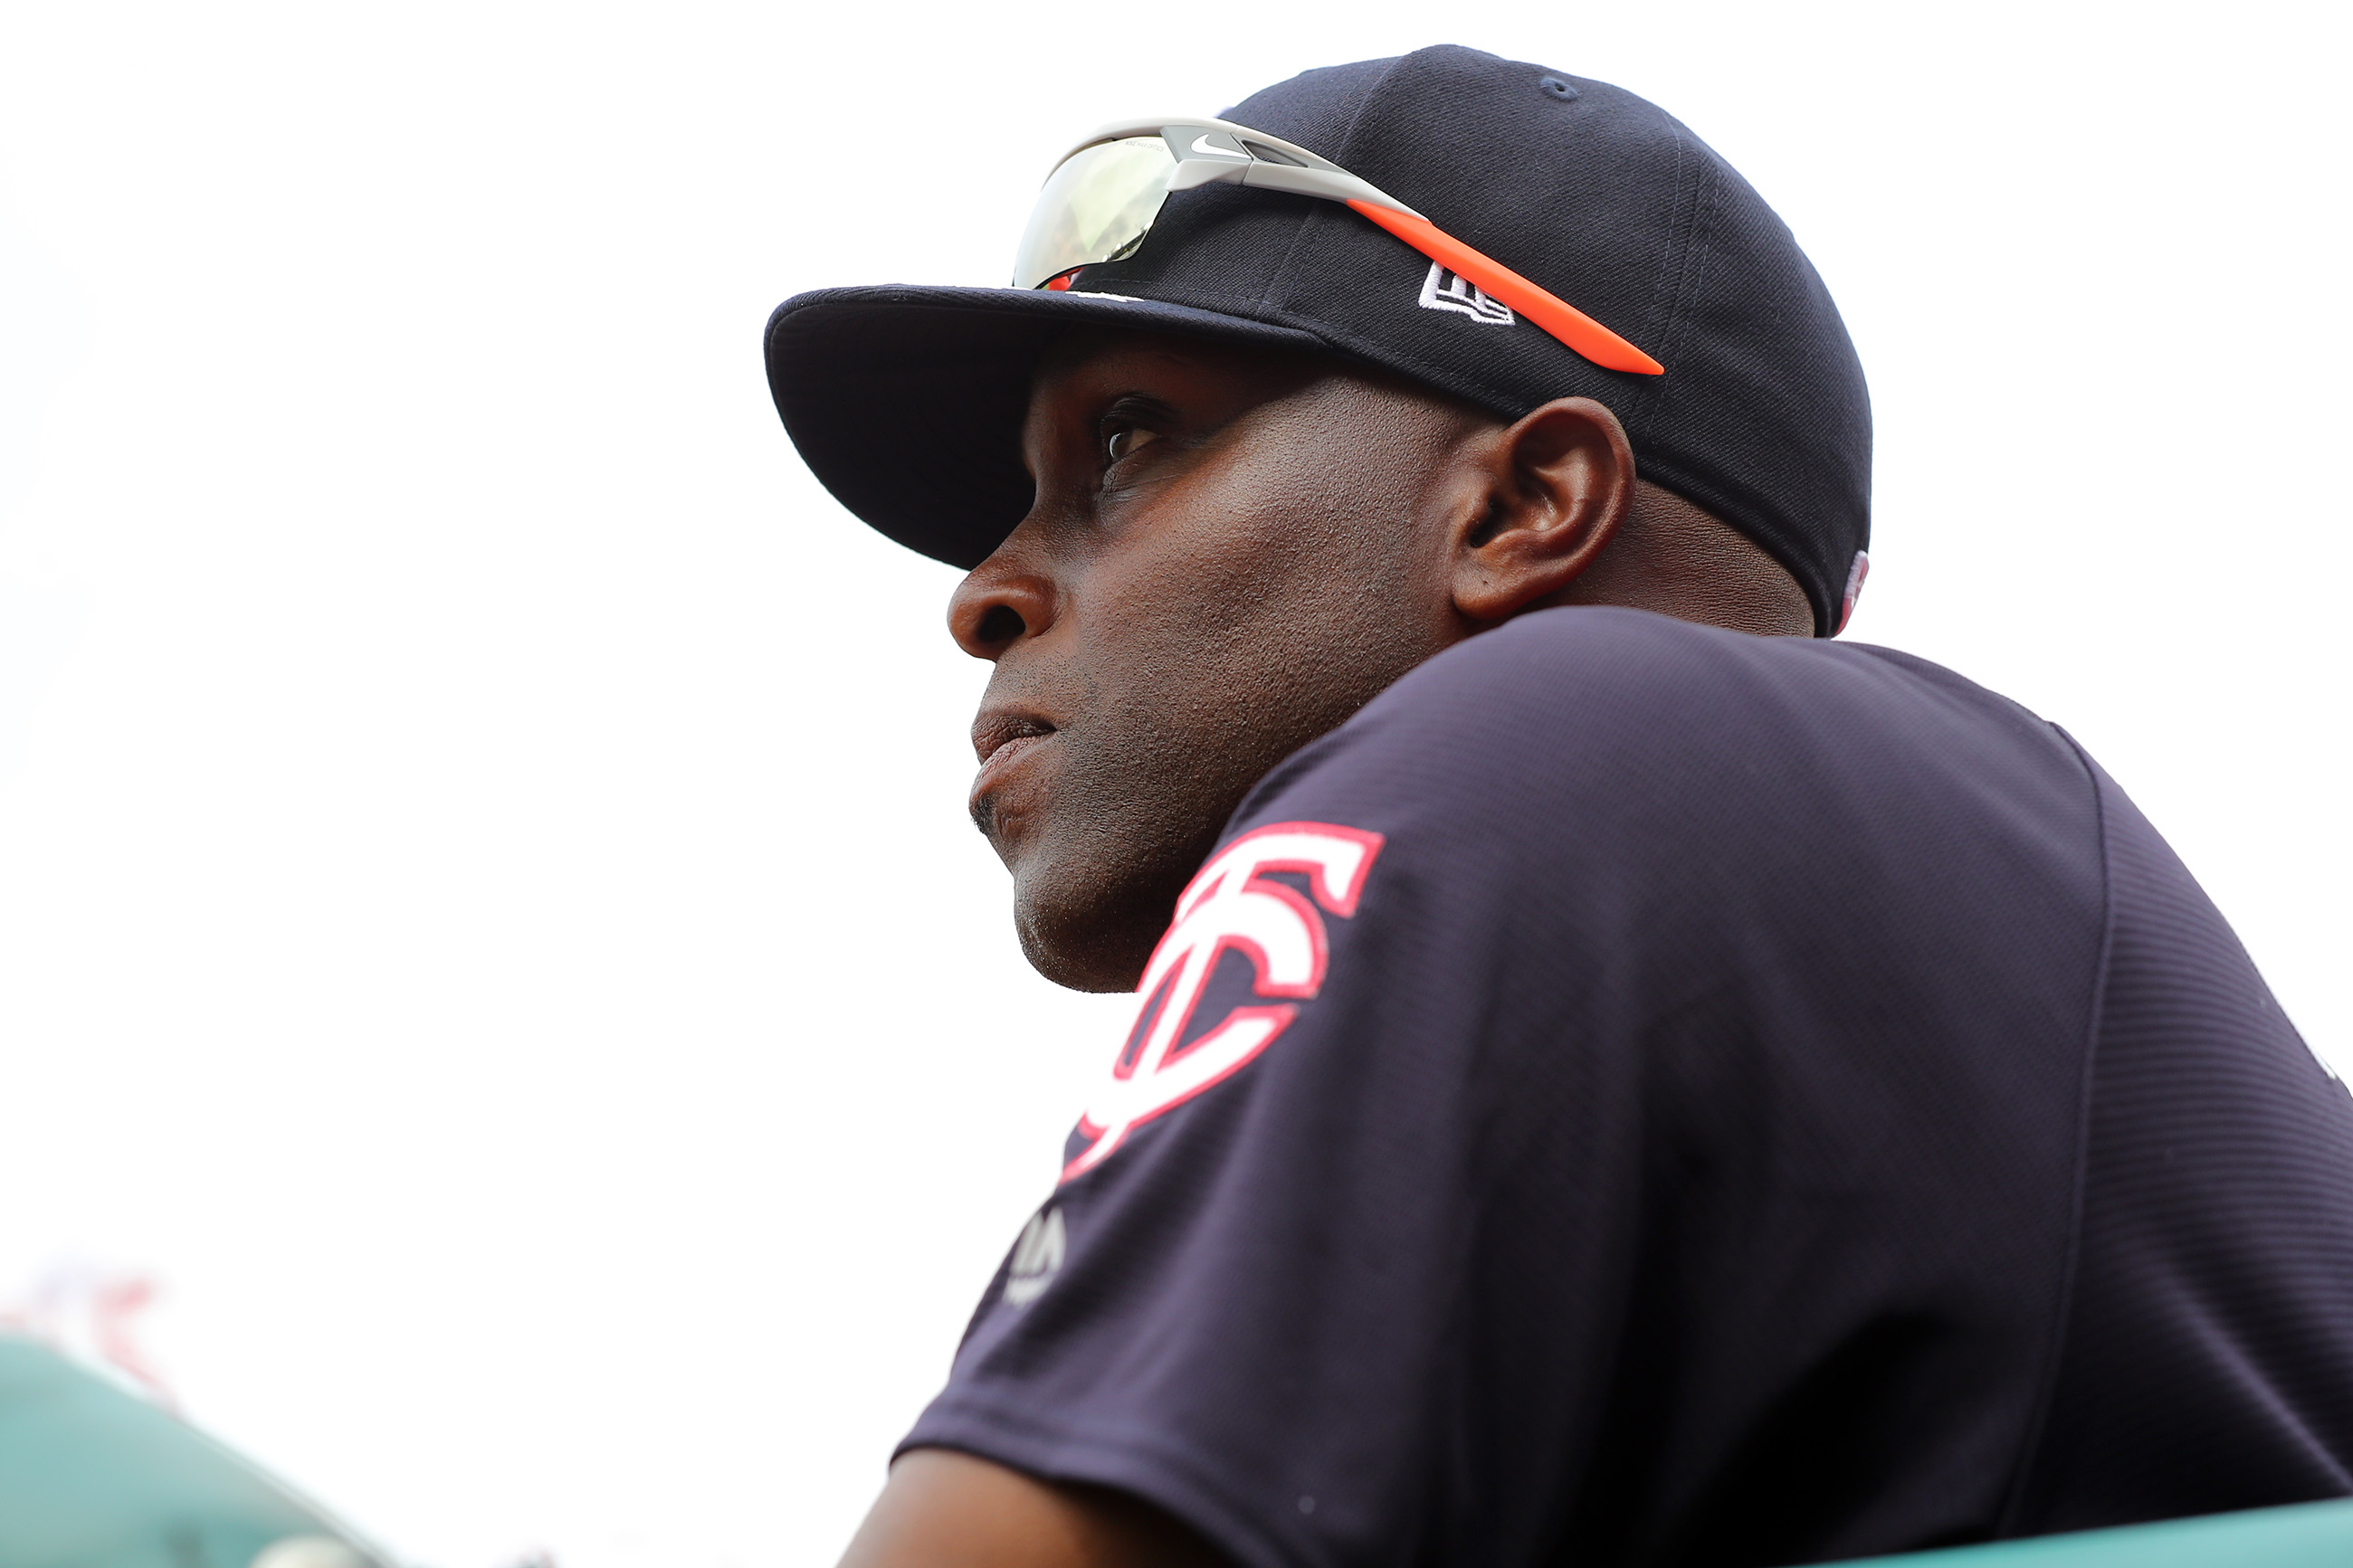 Torii Hunter of Team USA looks on during the SiriusXM All-Star Futures Game at Nationals Park in Washington DC, on Sunday, July 15, 2018. 